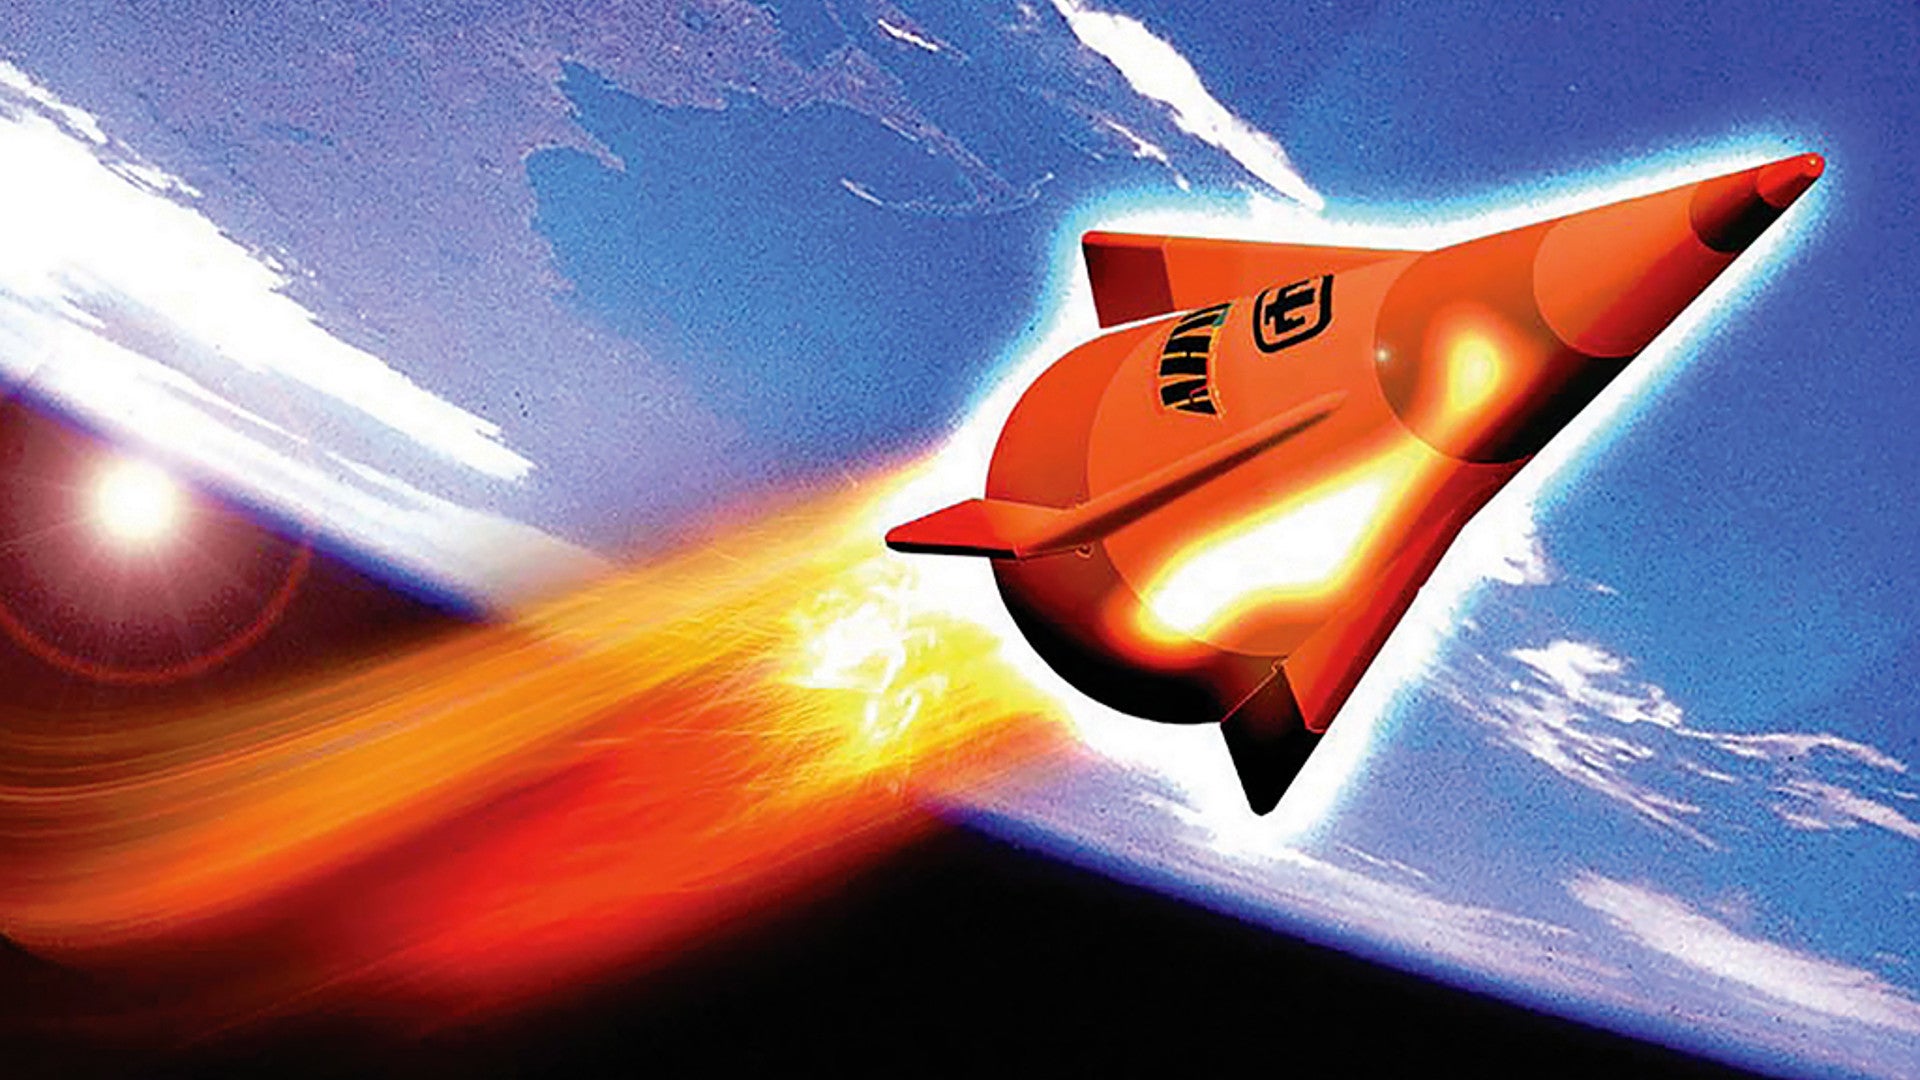 USAF, Army, and Navy Join Forces To Field America’s First Operational Hypersonic Weapon